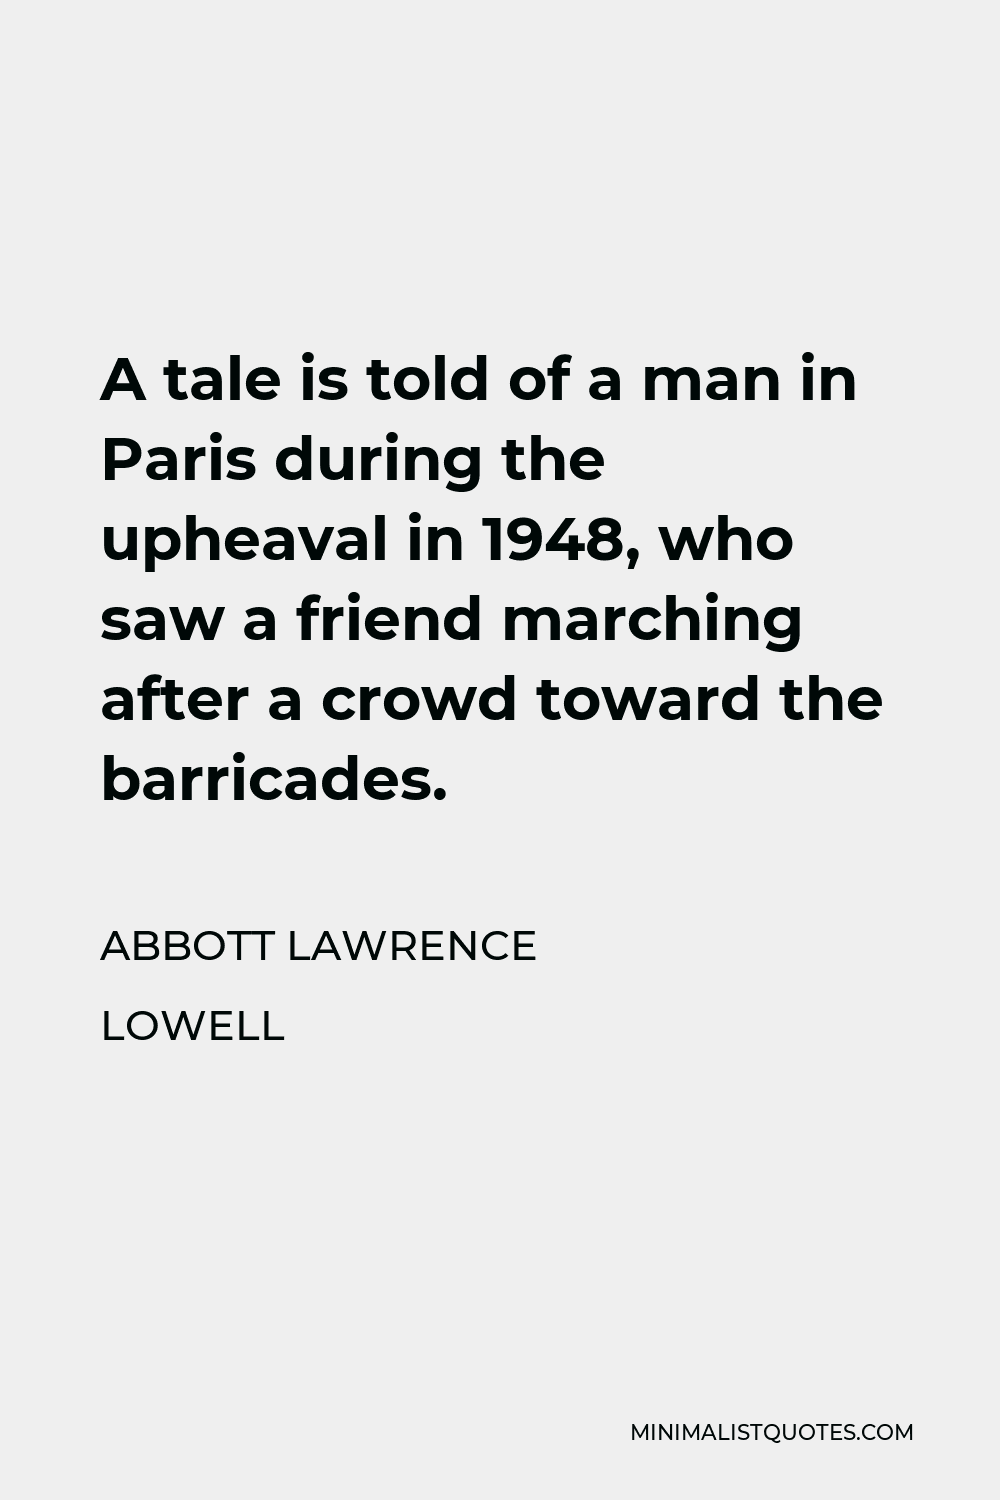 Abbott Lawrence Lowell Quote - A tale is told of a man in Paris during the upheaval in 1948, who saw a friend marching after a crowd toward the barricades.